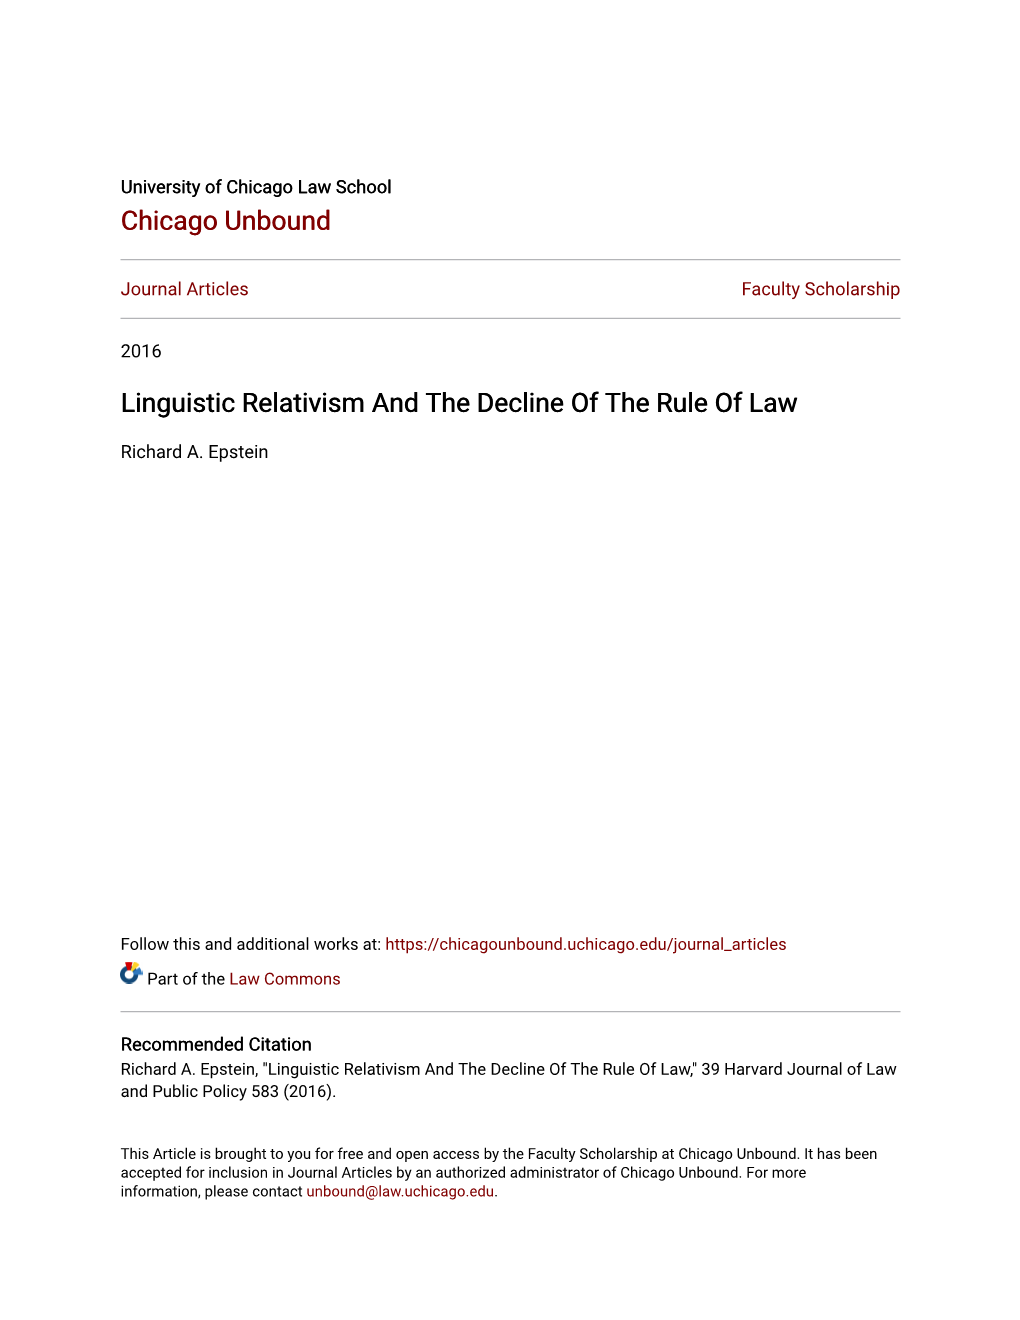 Linguistic Relativism and the Decline of the Rule of Law